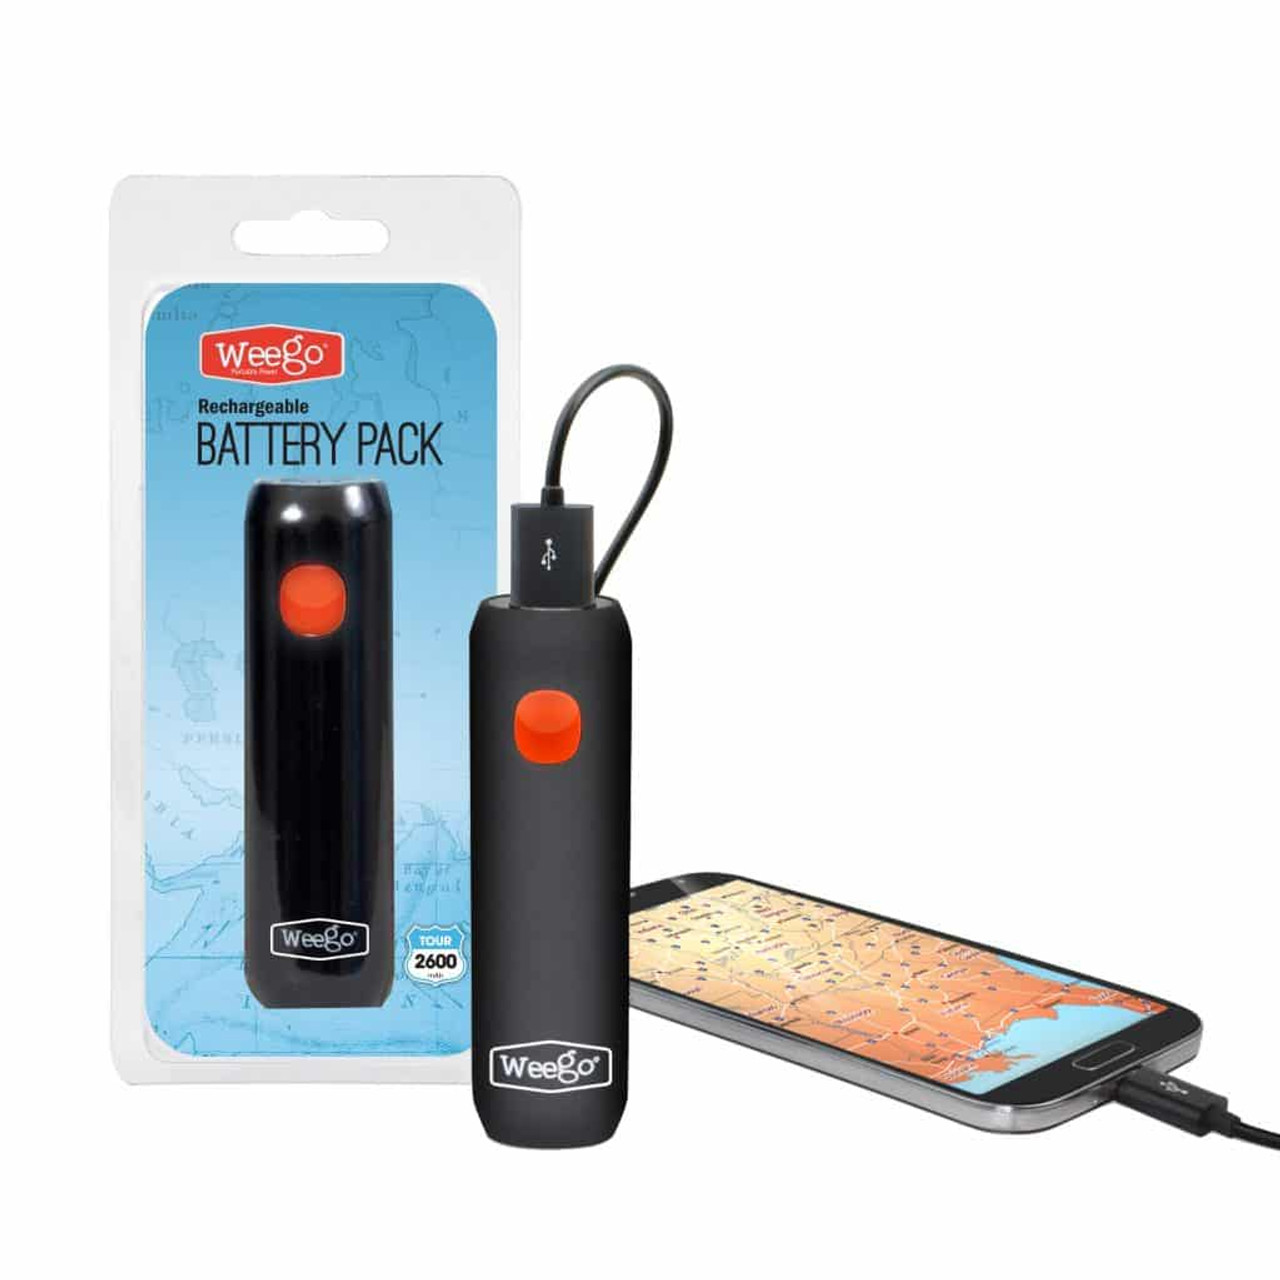 Weego Tour 2600 Rechargeable Battery Pack